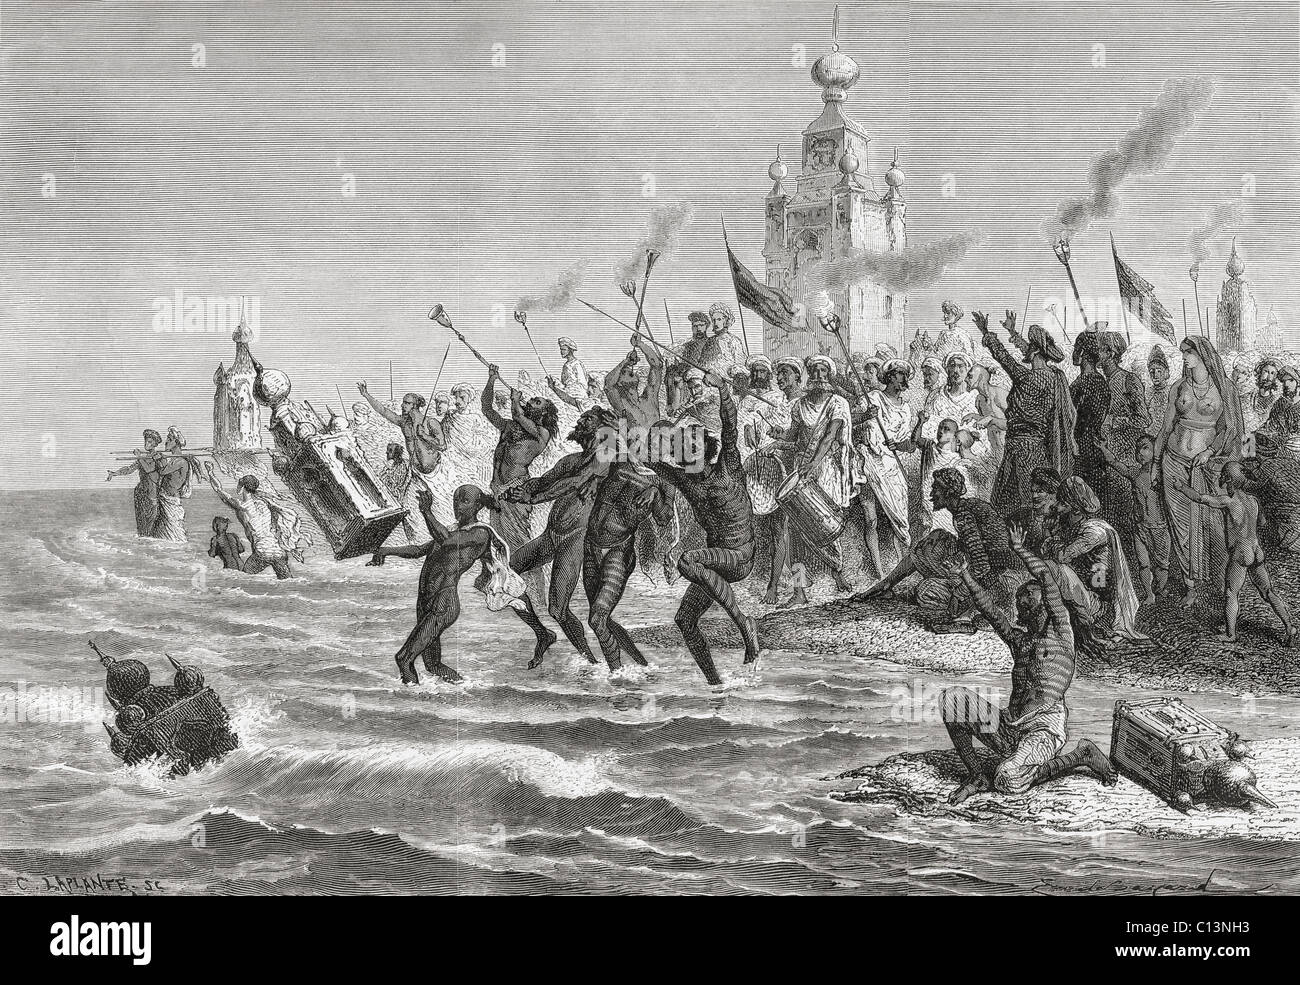 Celebrating the Moharum Festival in remembrance of the martyrdom of Imam Hussein, Bombay, India in the 19th century. Stock Photo